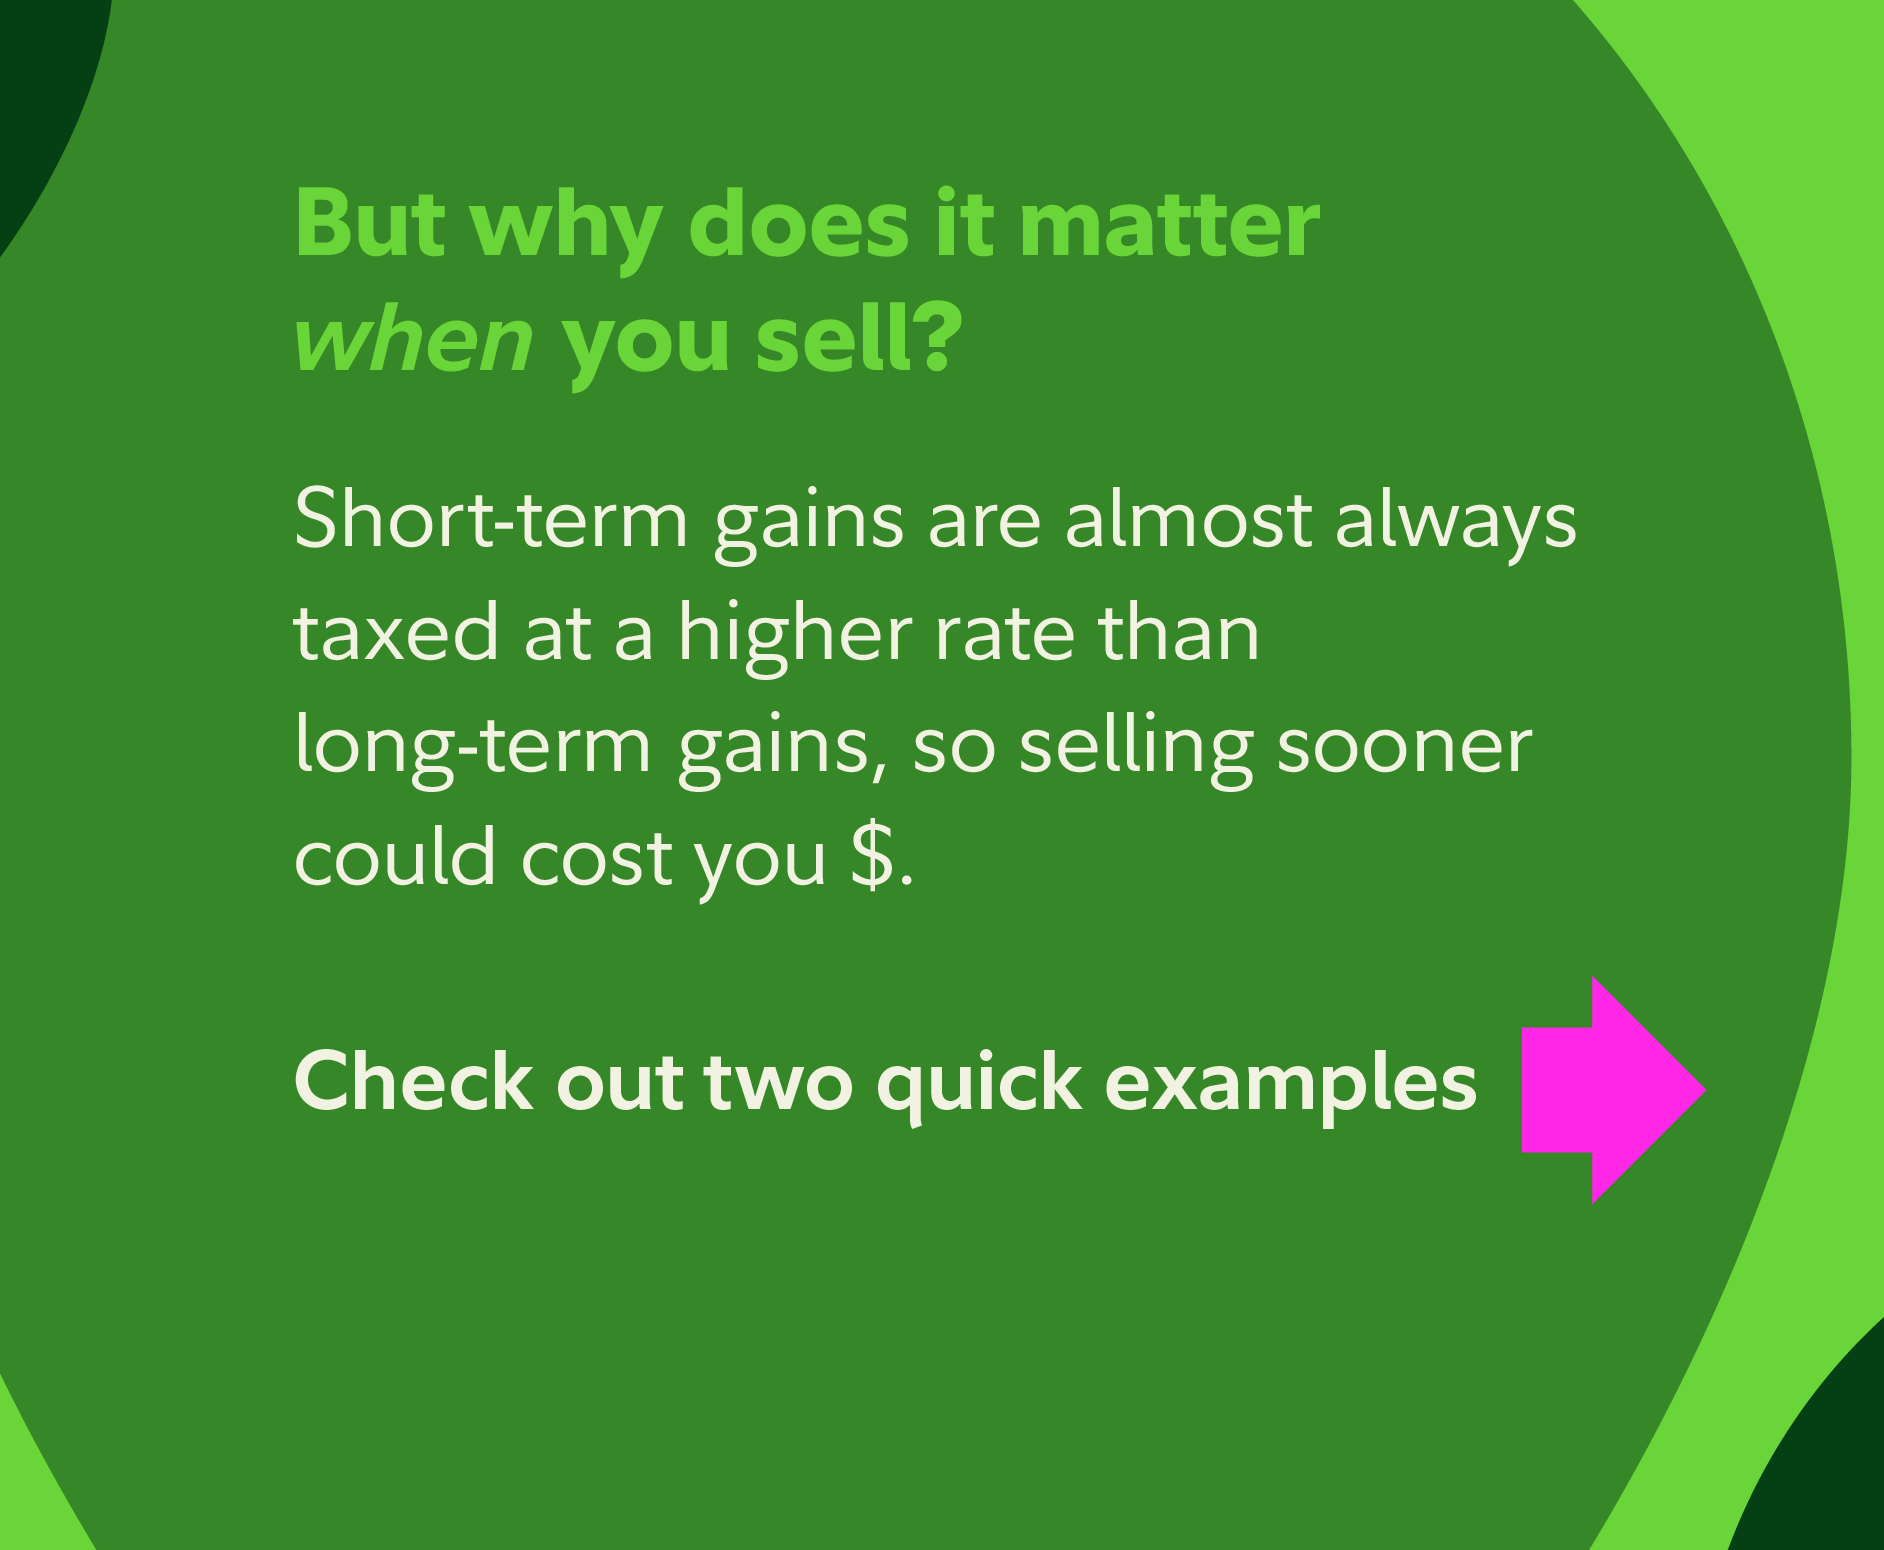 But why does it matter when you sell? Short-term gains are almost always taxed at a higher rate than long-term gains, so selling sooner could cost you $. Check out two quick examples.